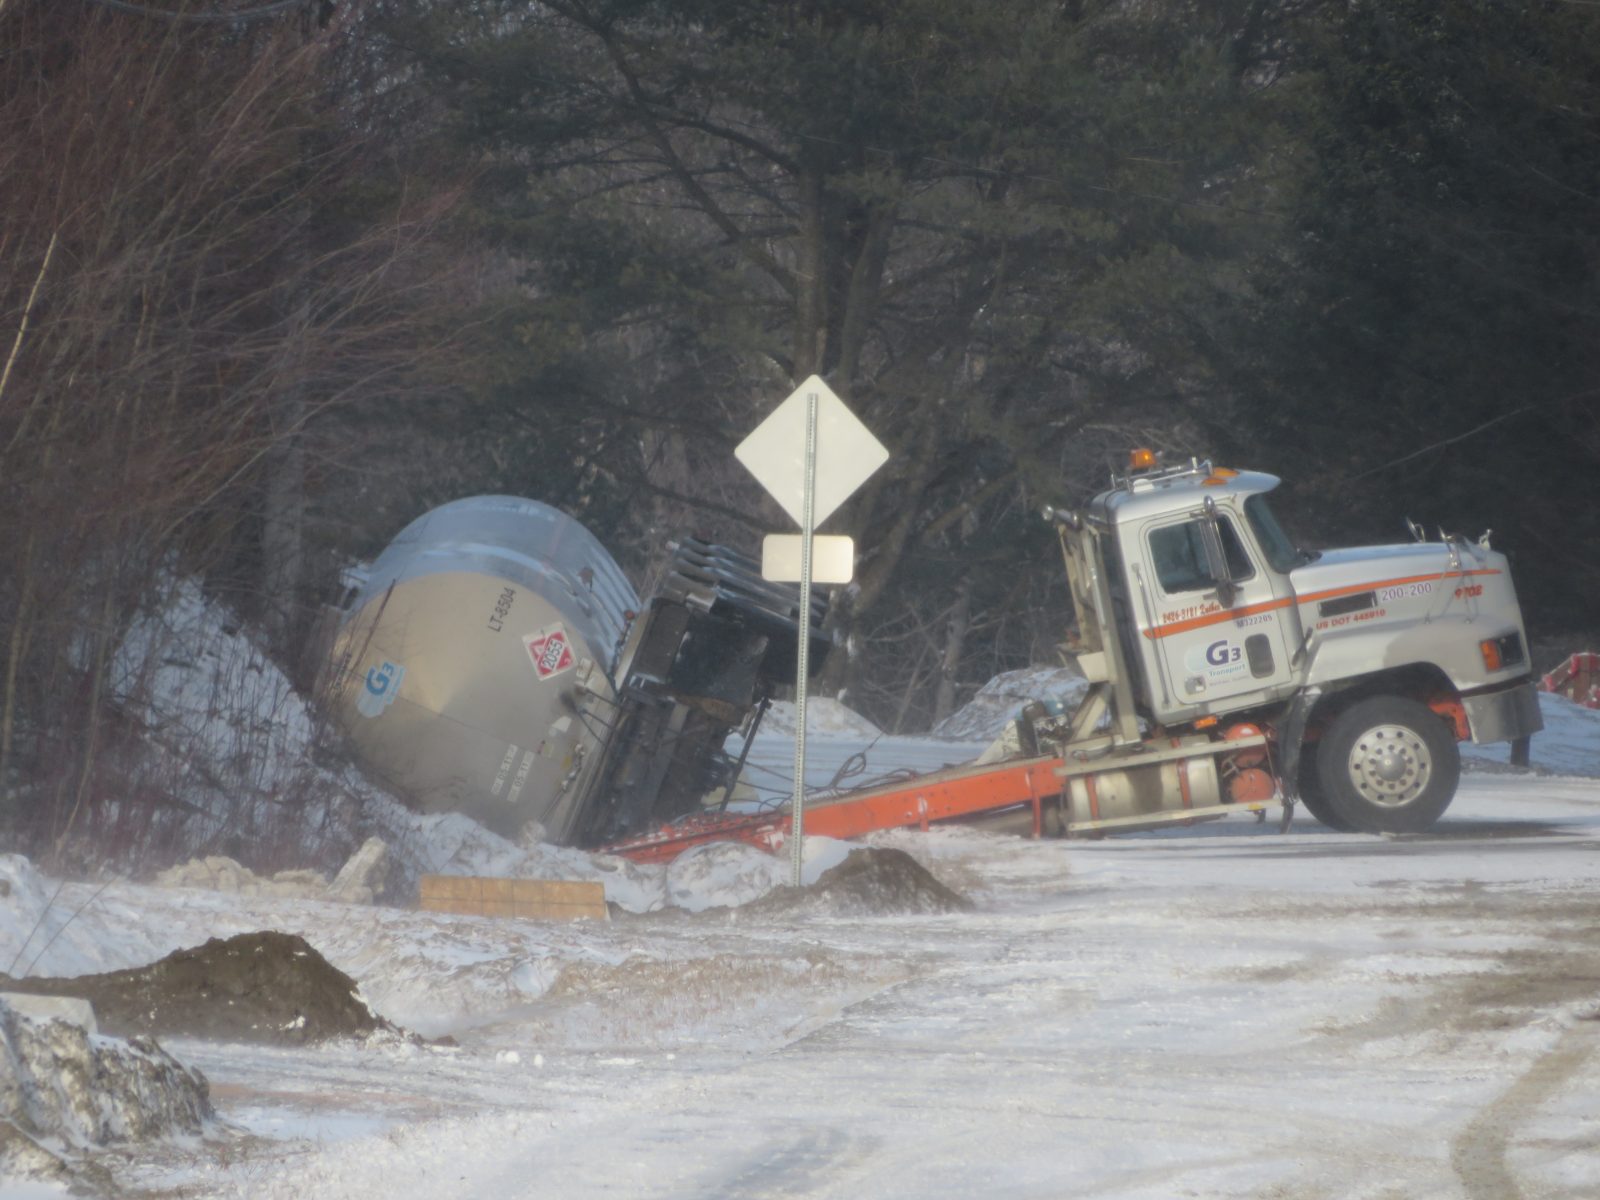 Tanker carrying  dangerous chemical  takes the ditch in  East-Bolton